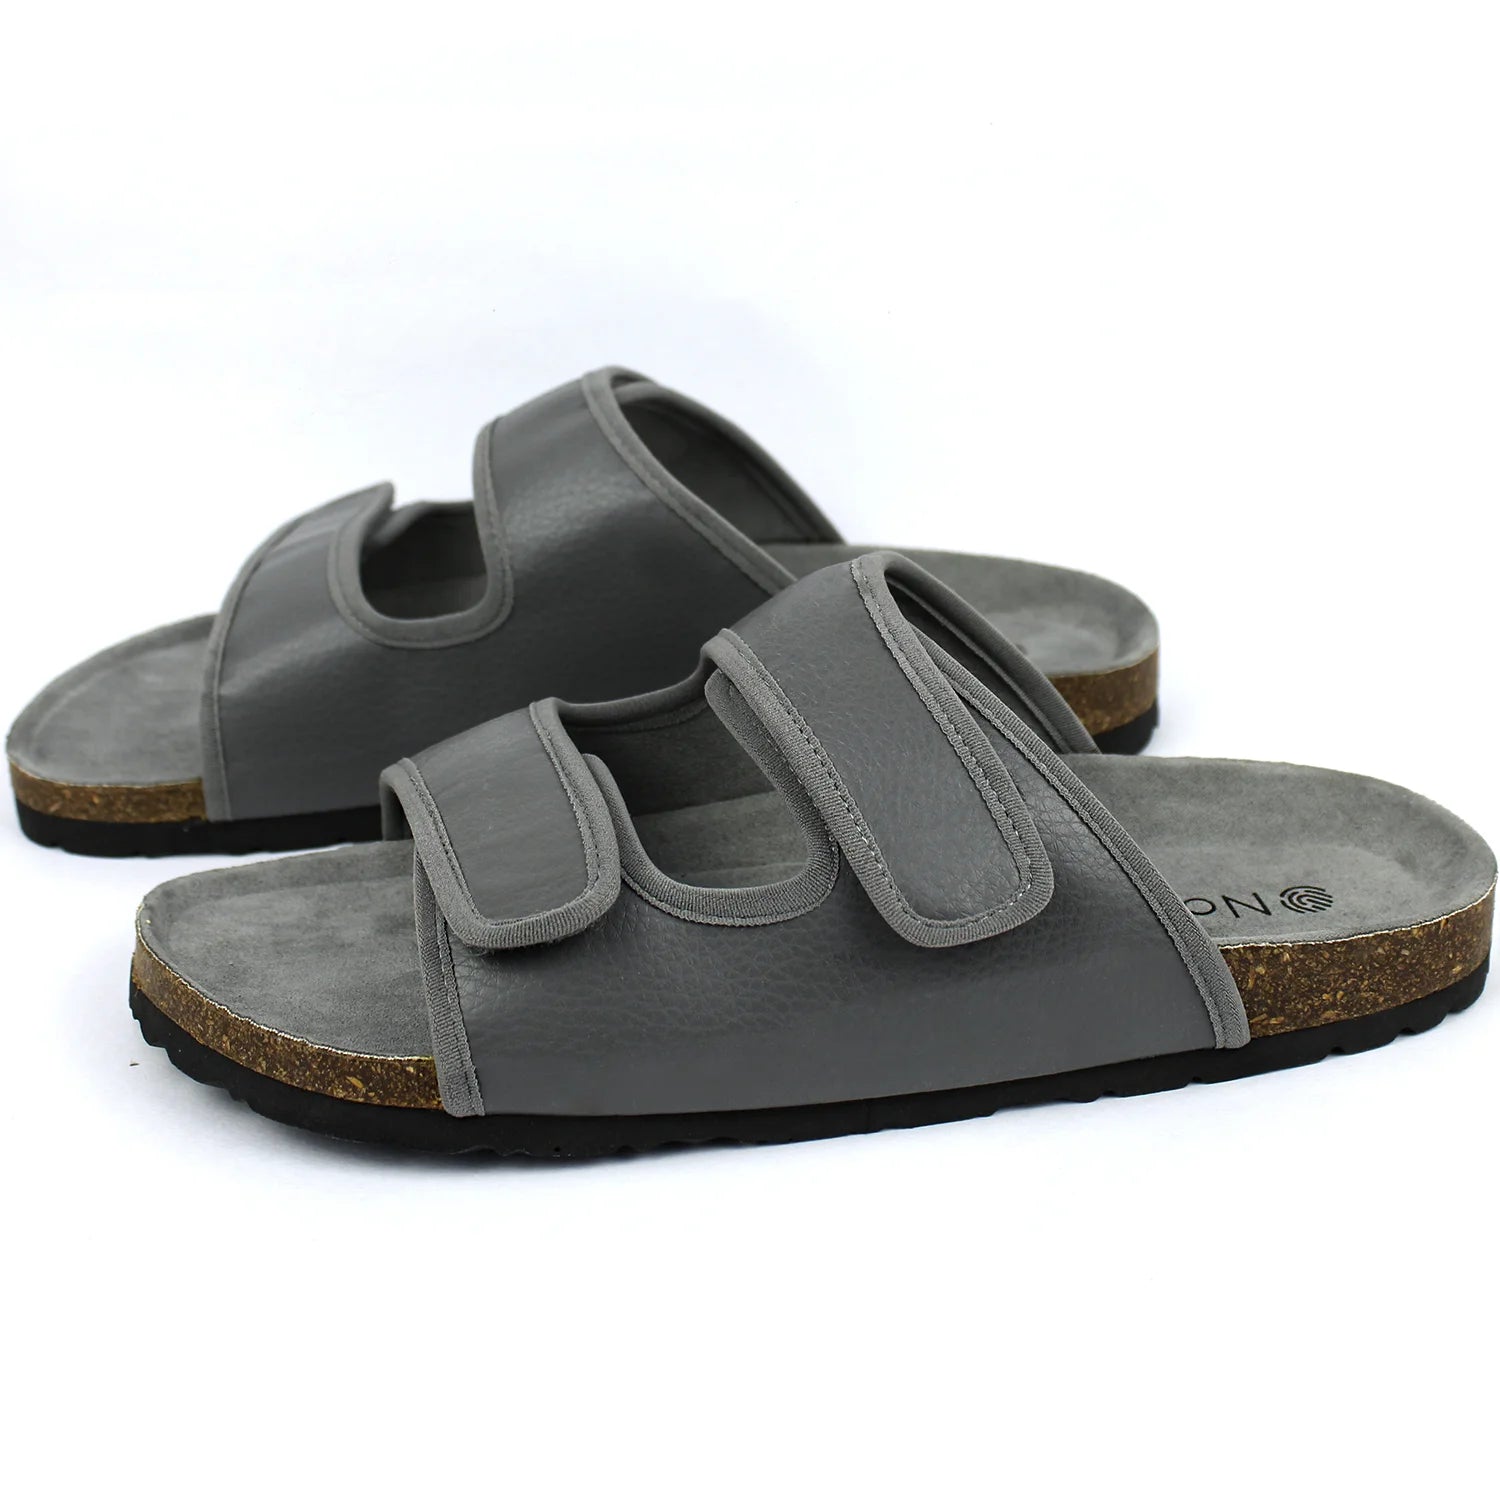 Stay stylish and comfortable with these daily wear Cloudy Grey cork sandals for men